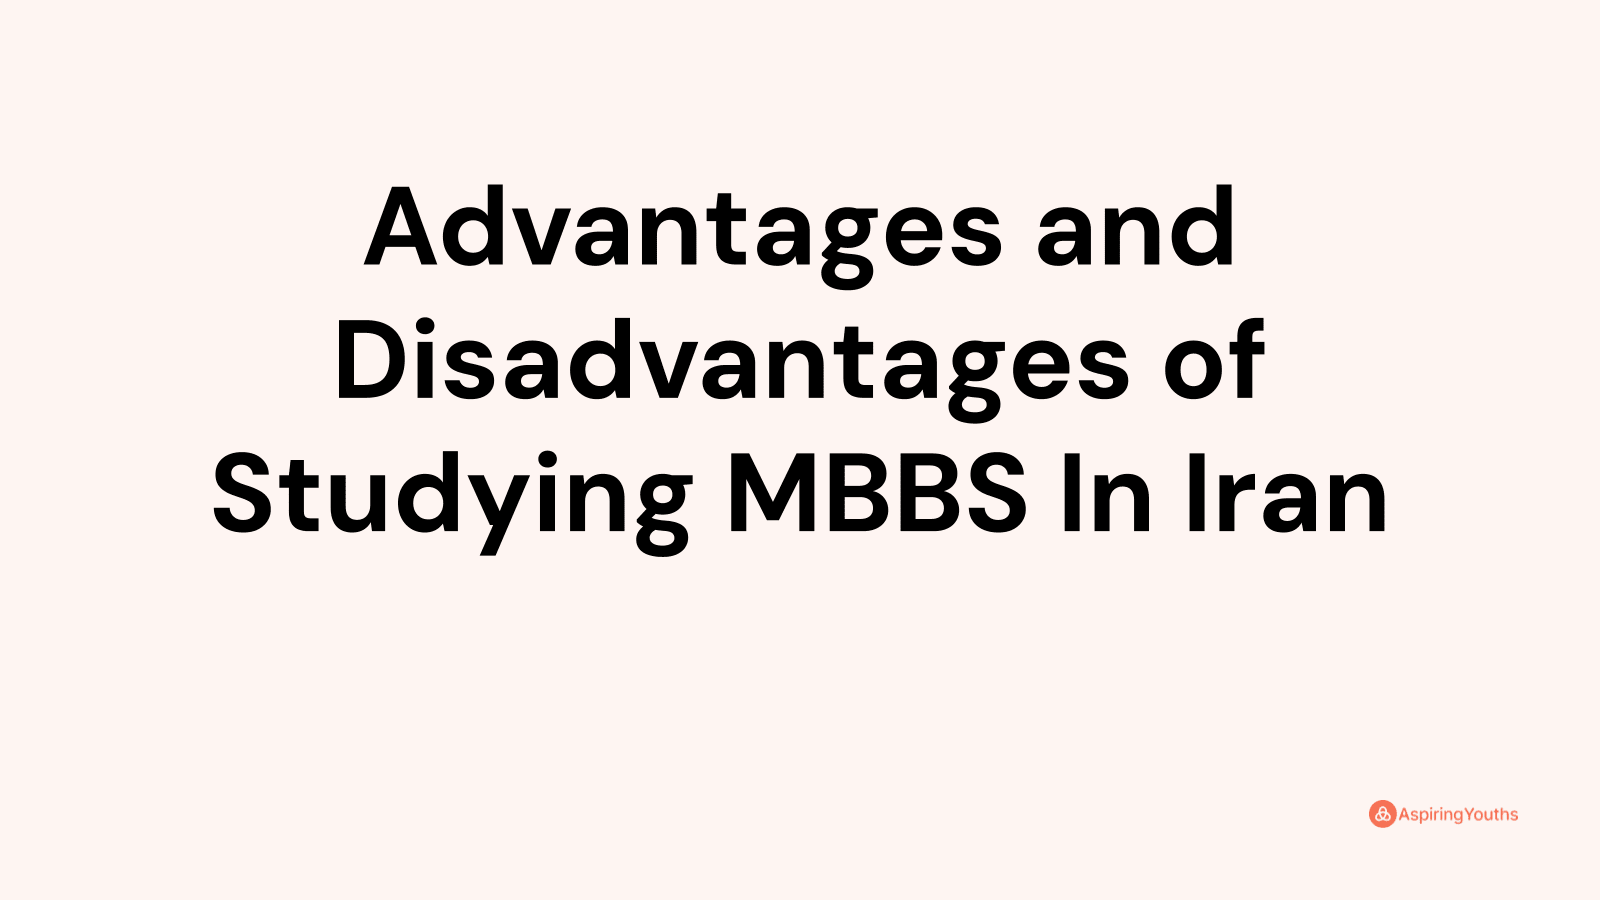 Advantages and disadvantages of Studying MBBS In Iran